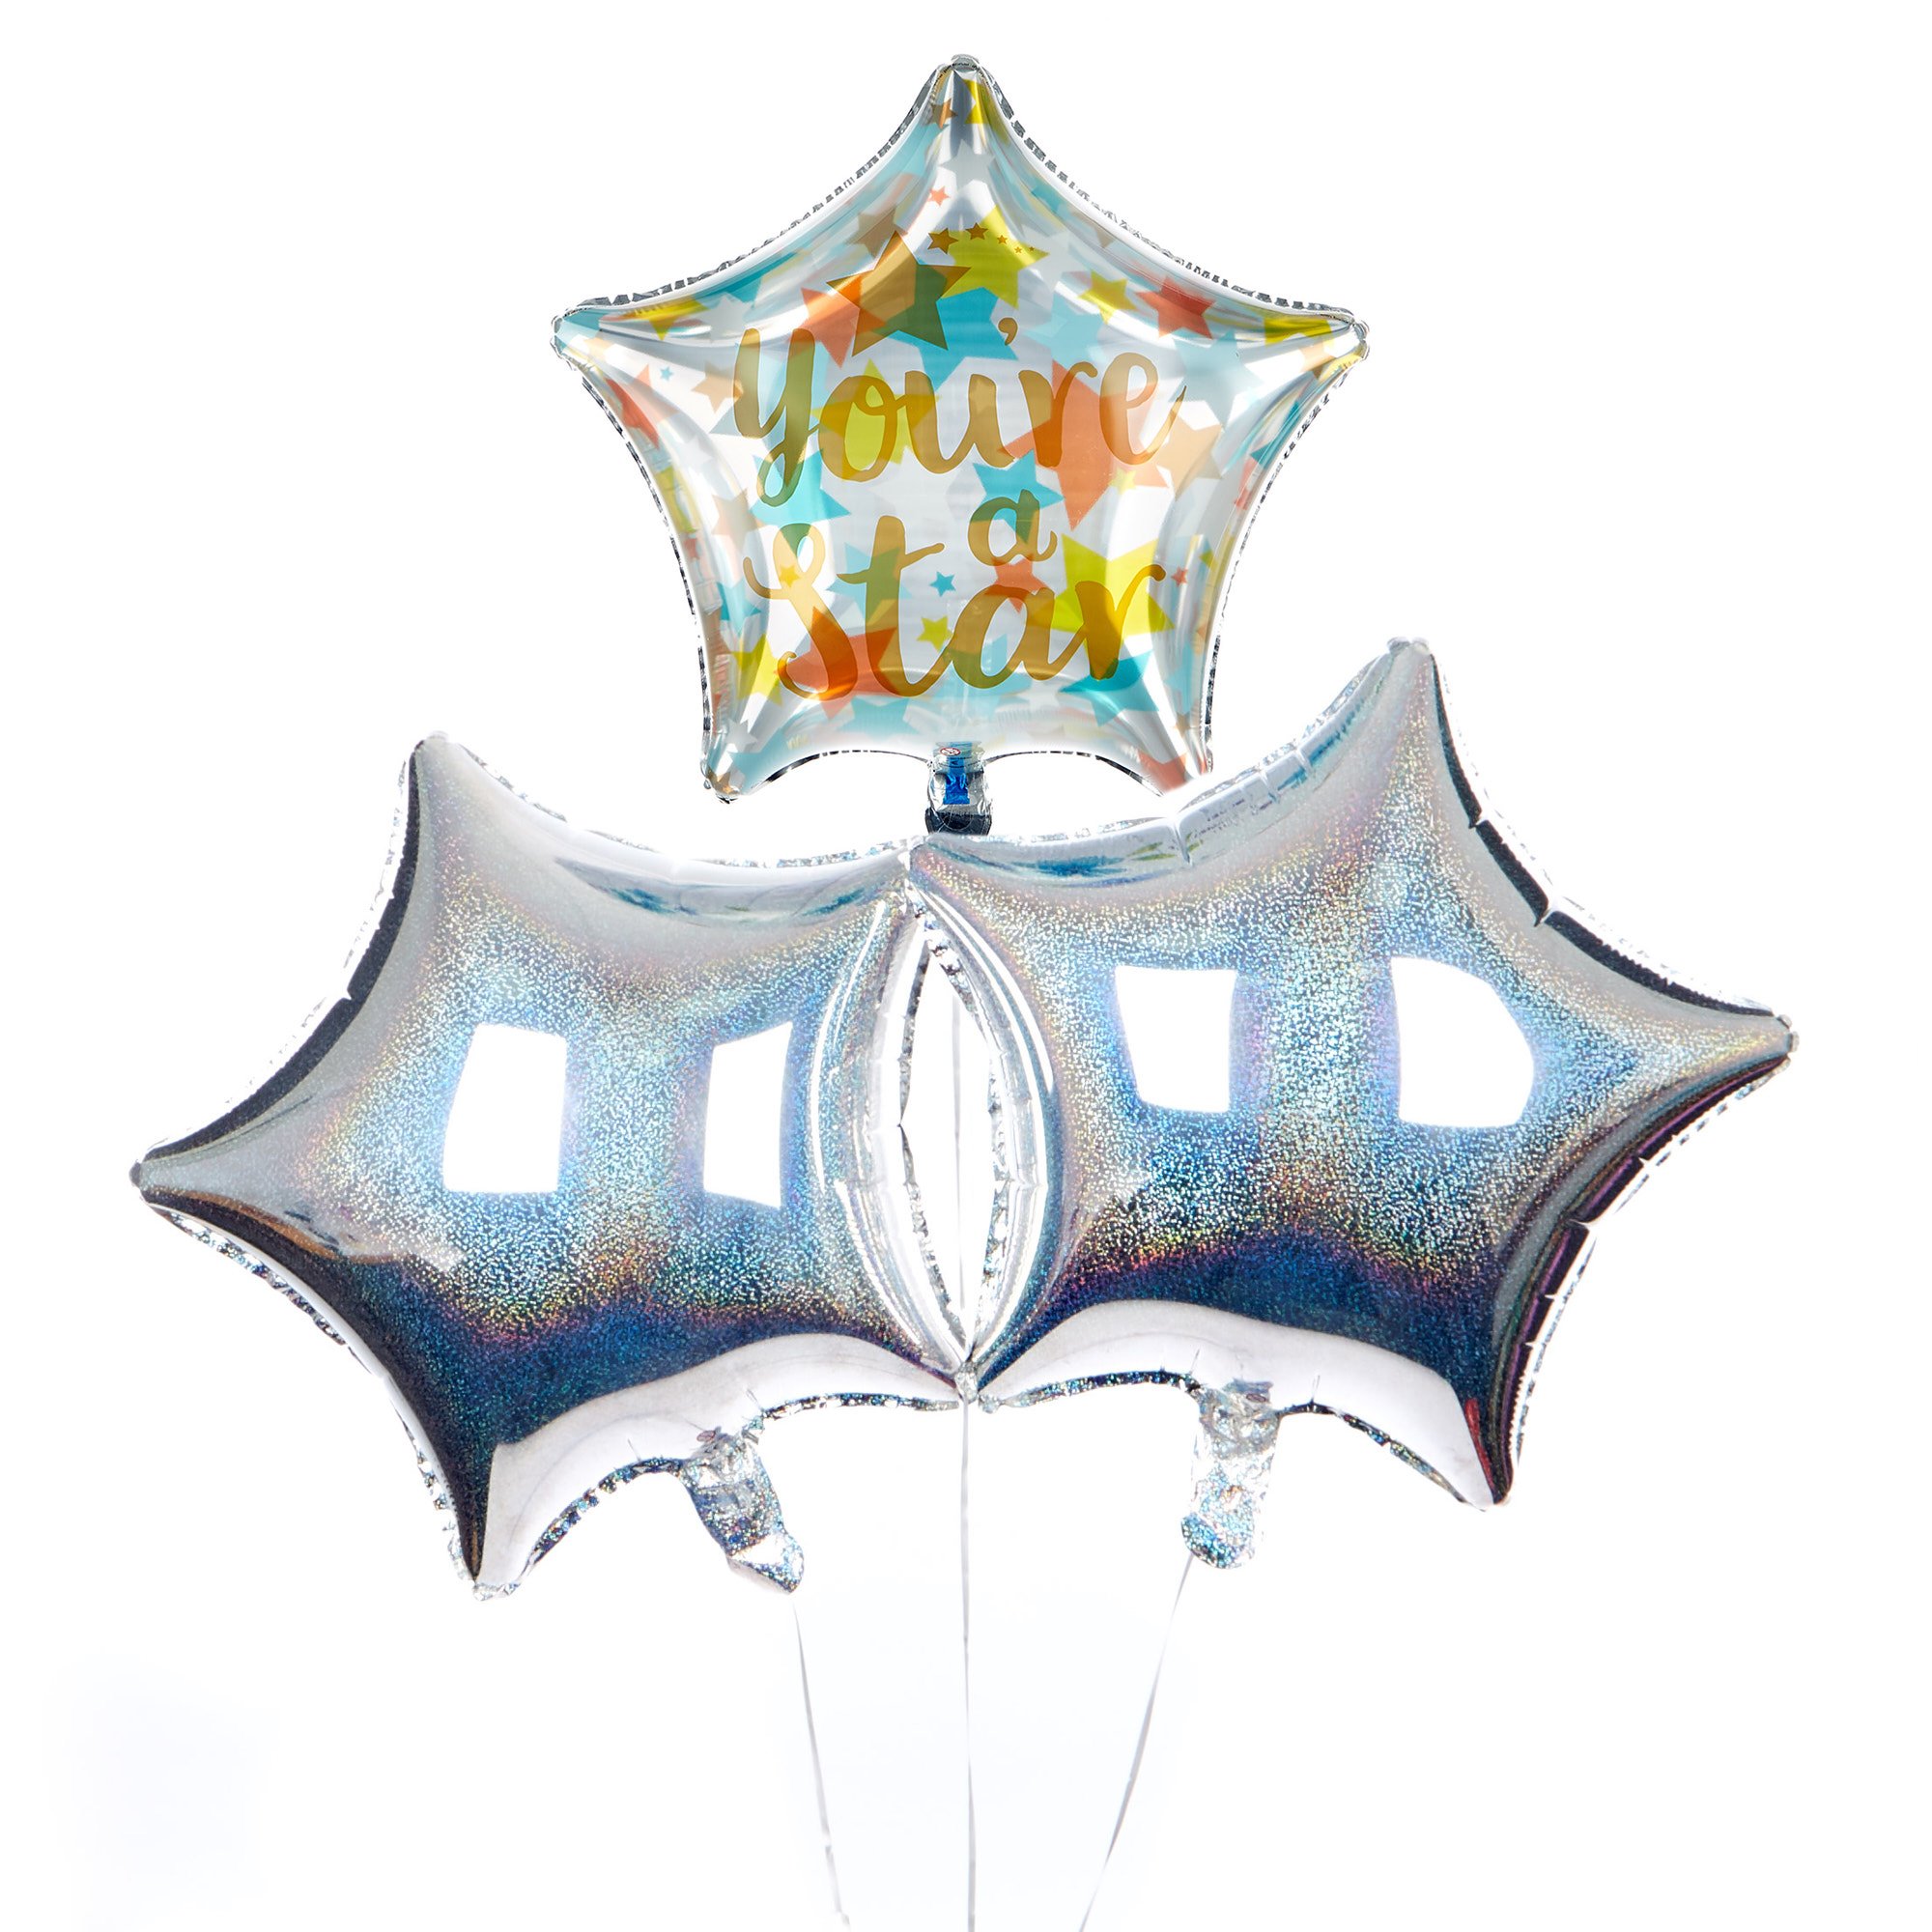 You're A Star Balloon Bouquet - DELIVERED INFLATED!